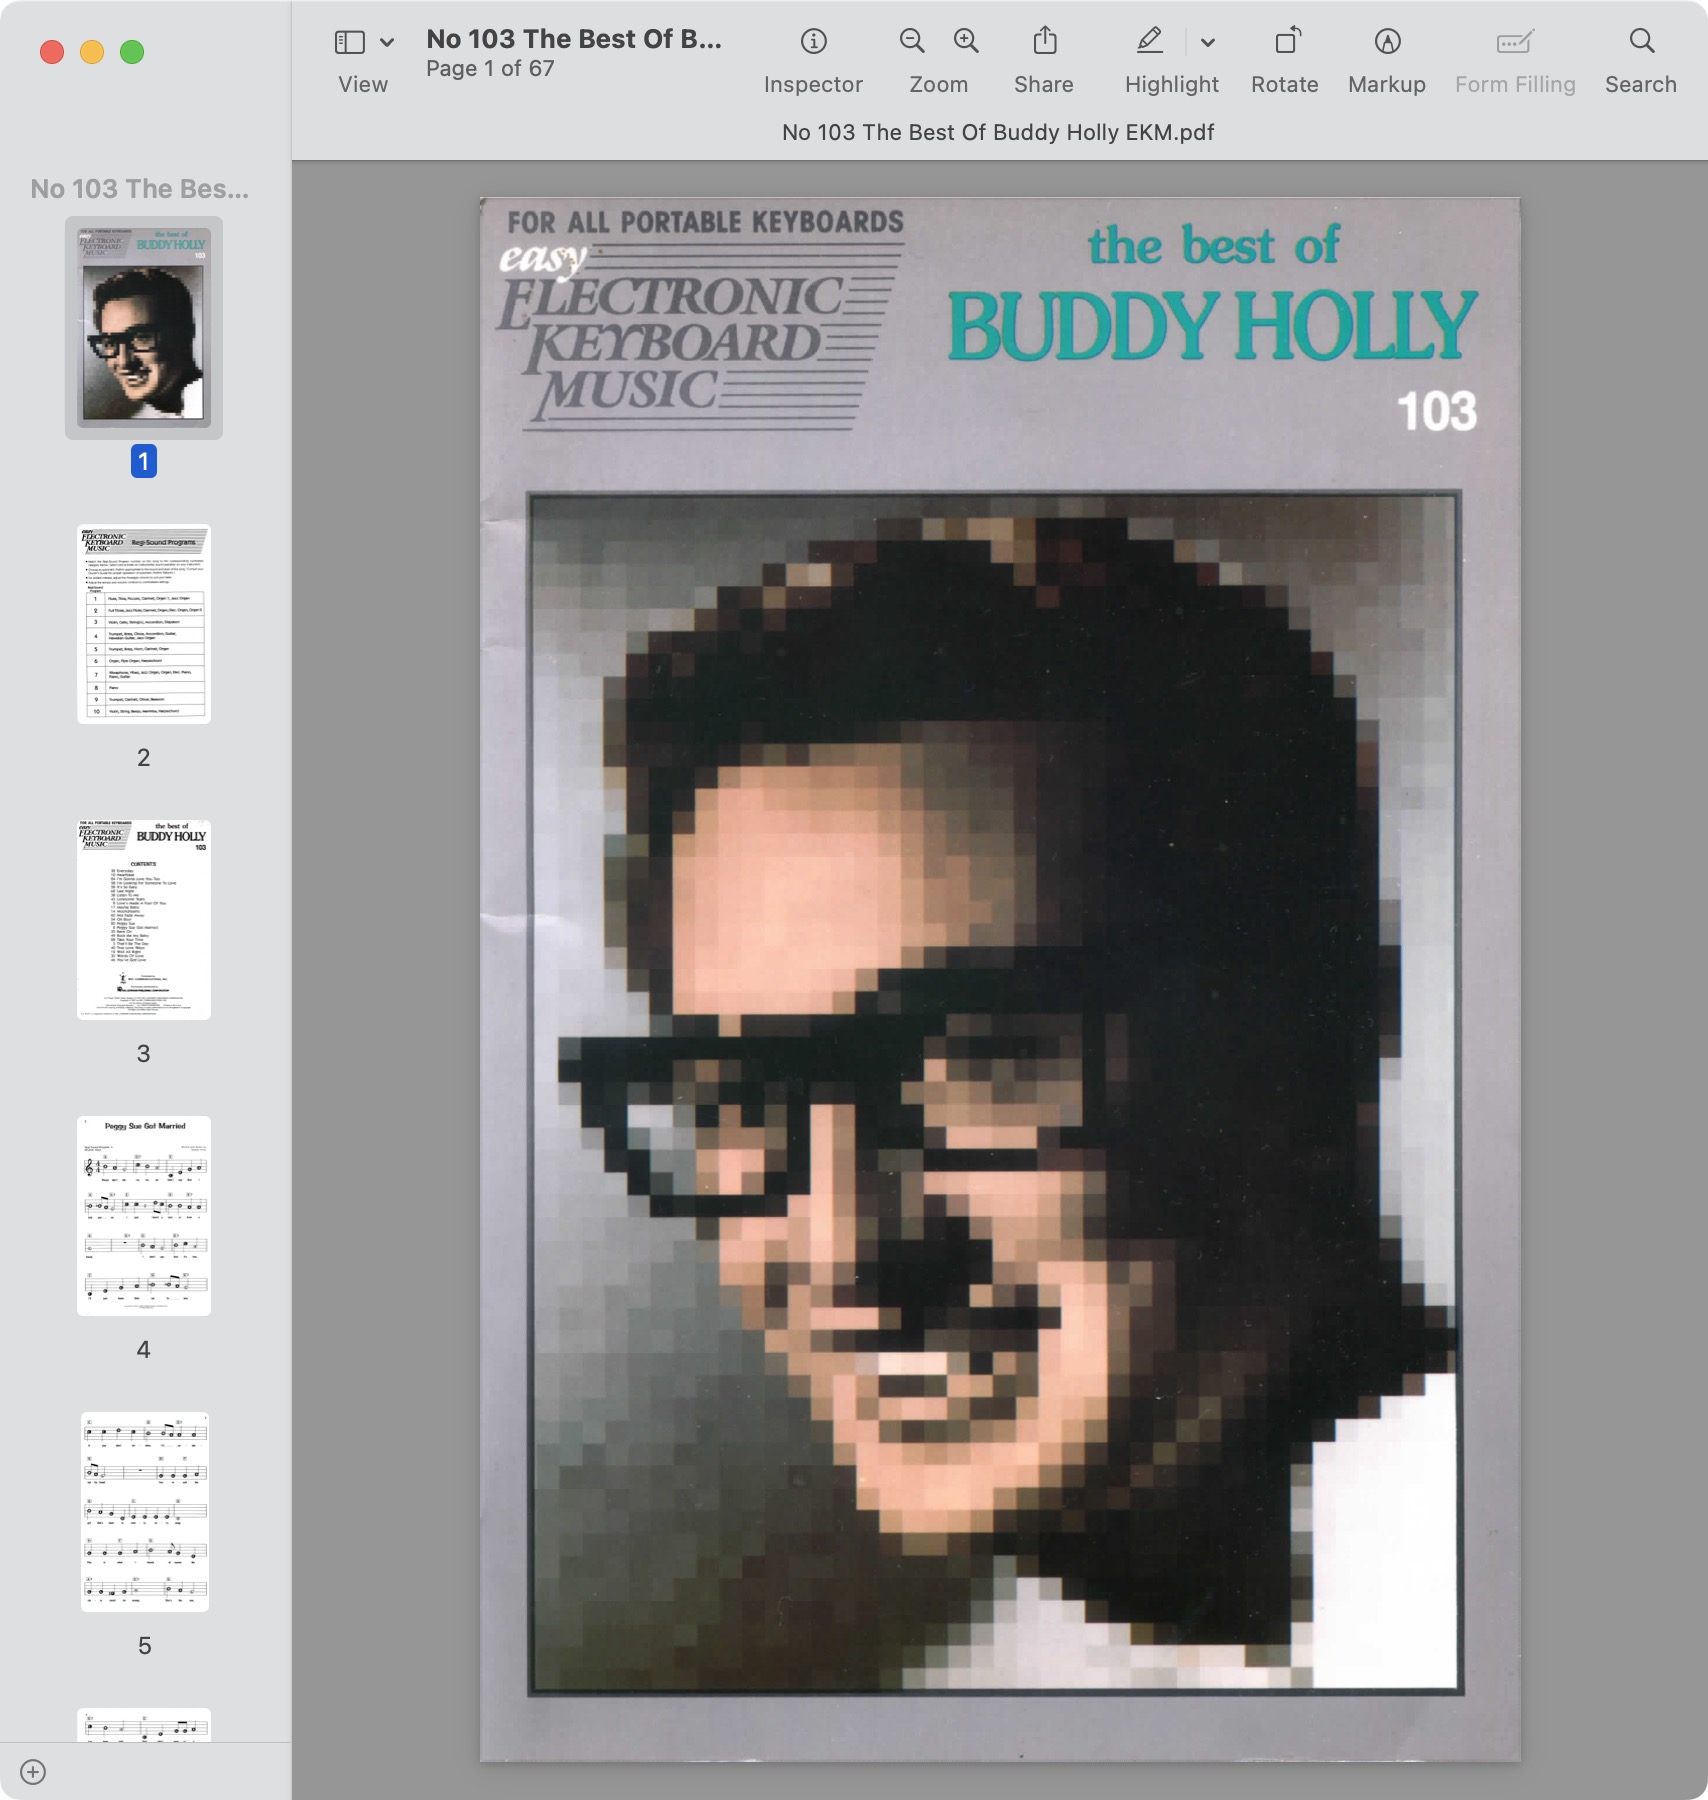 Easy Electronic Keyboard Music - 103 - The Best Of Buddy Holly.jpg